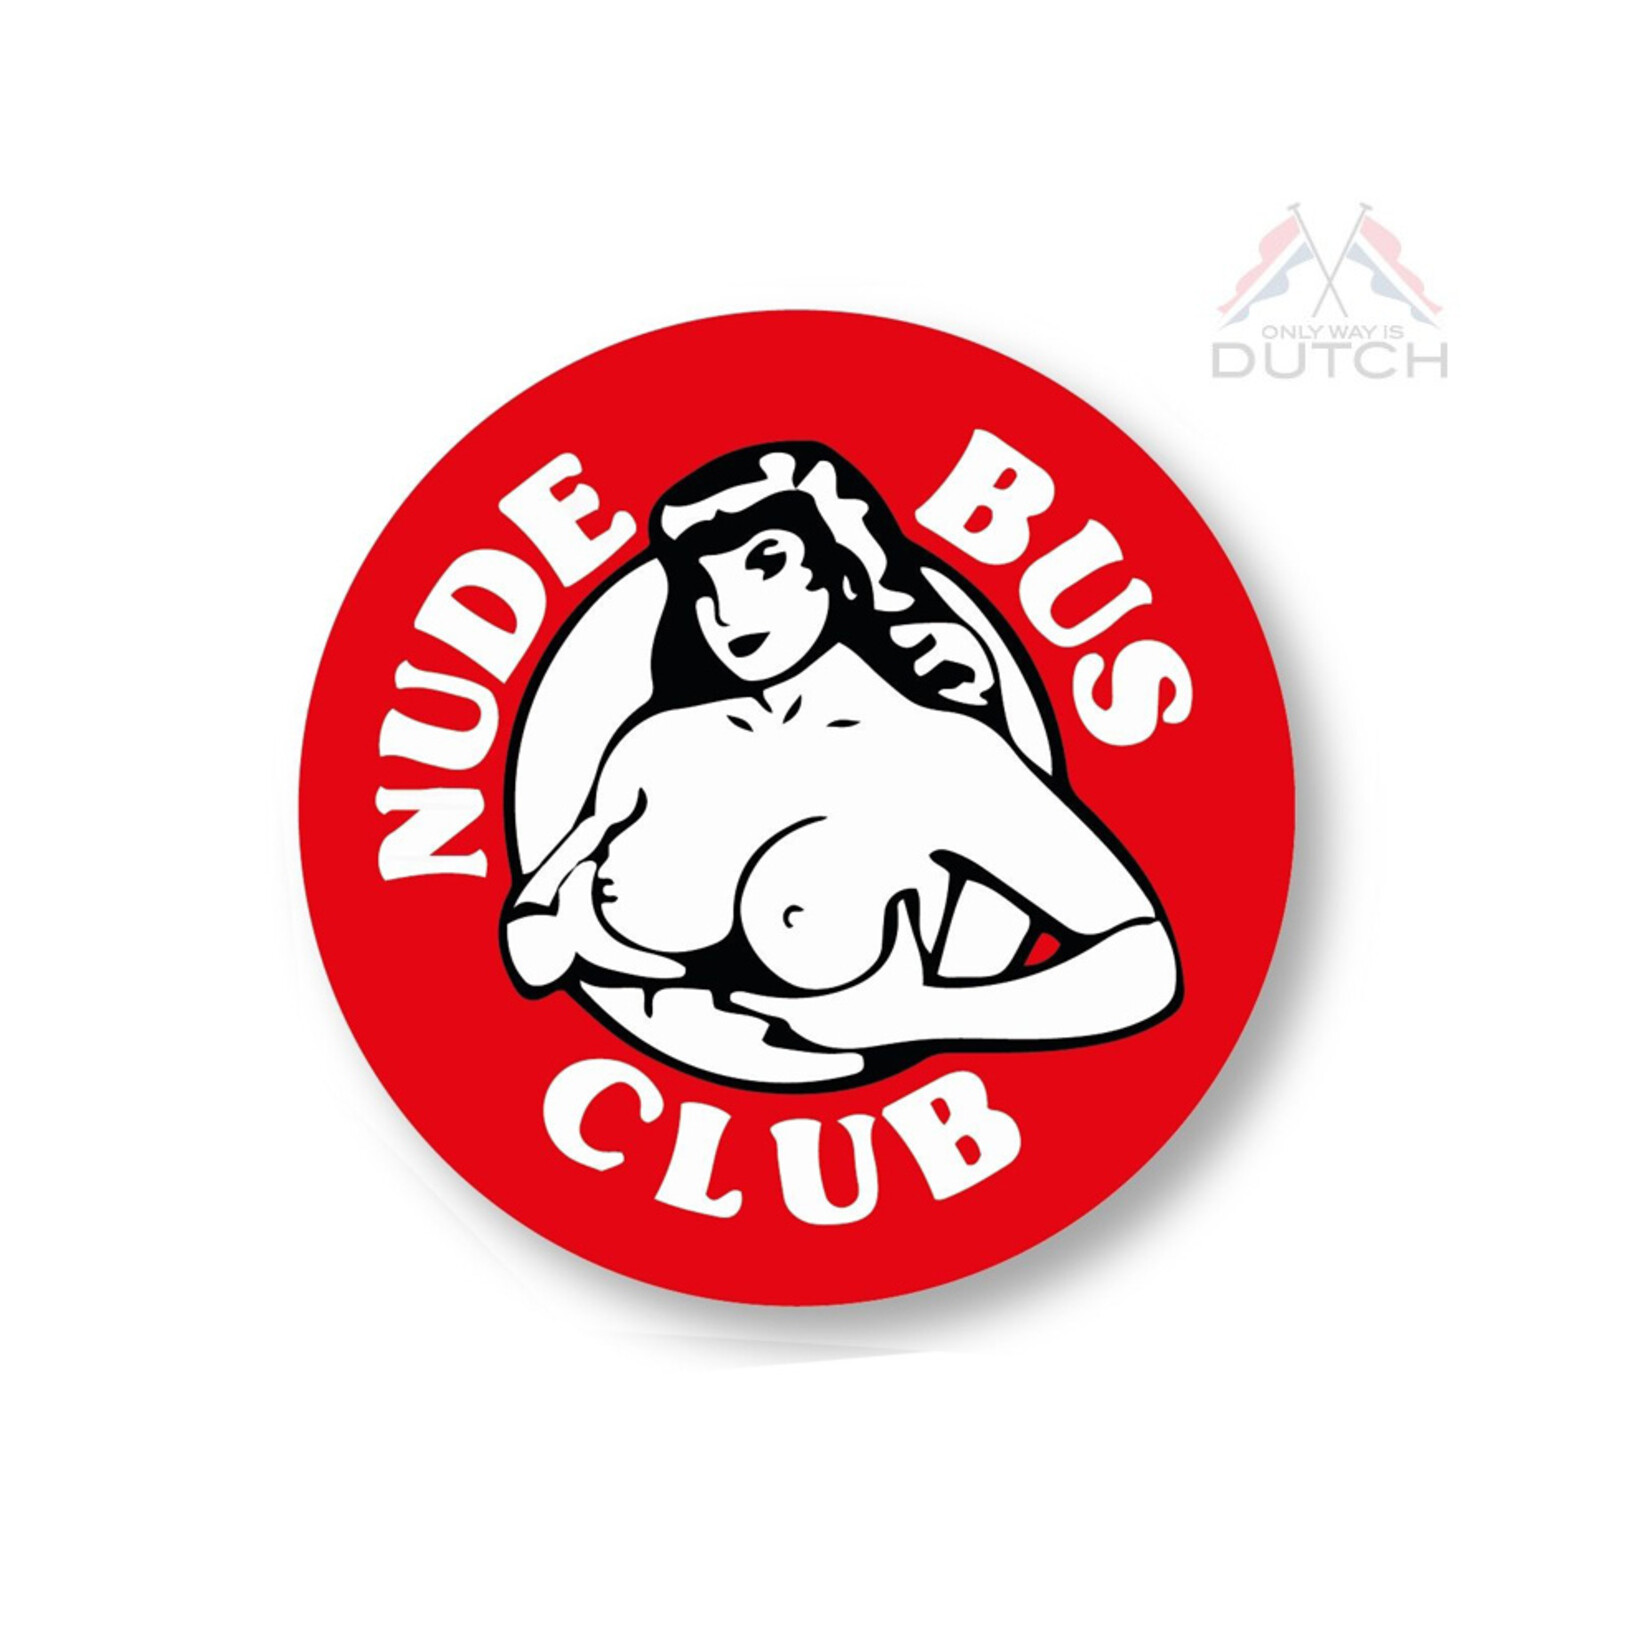 ONLY WAY IS DUTCH Only Way Is Dutch Sticker - Nude Bus Club